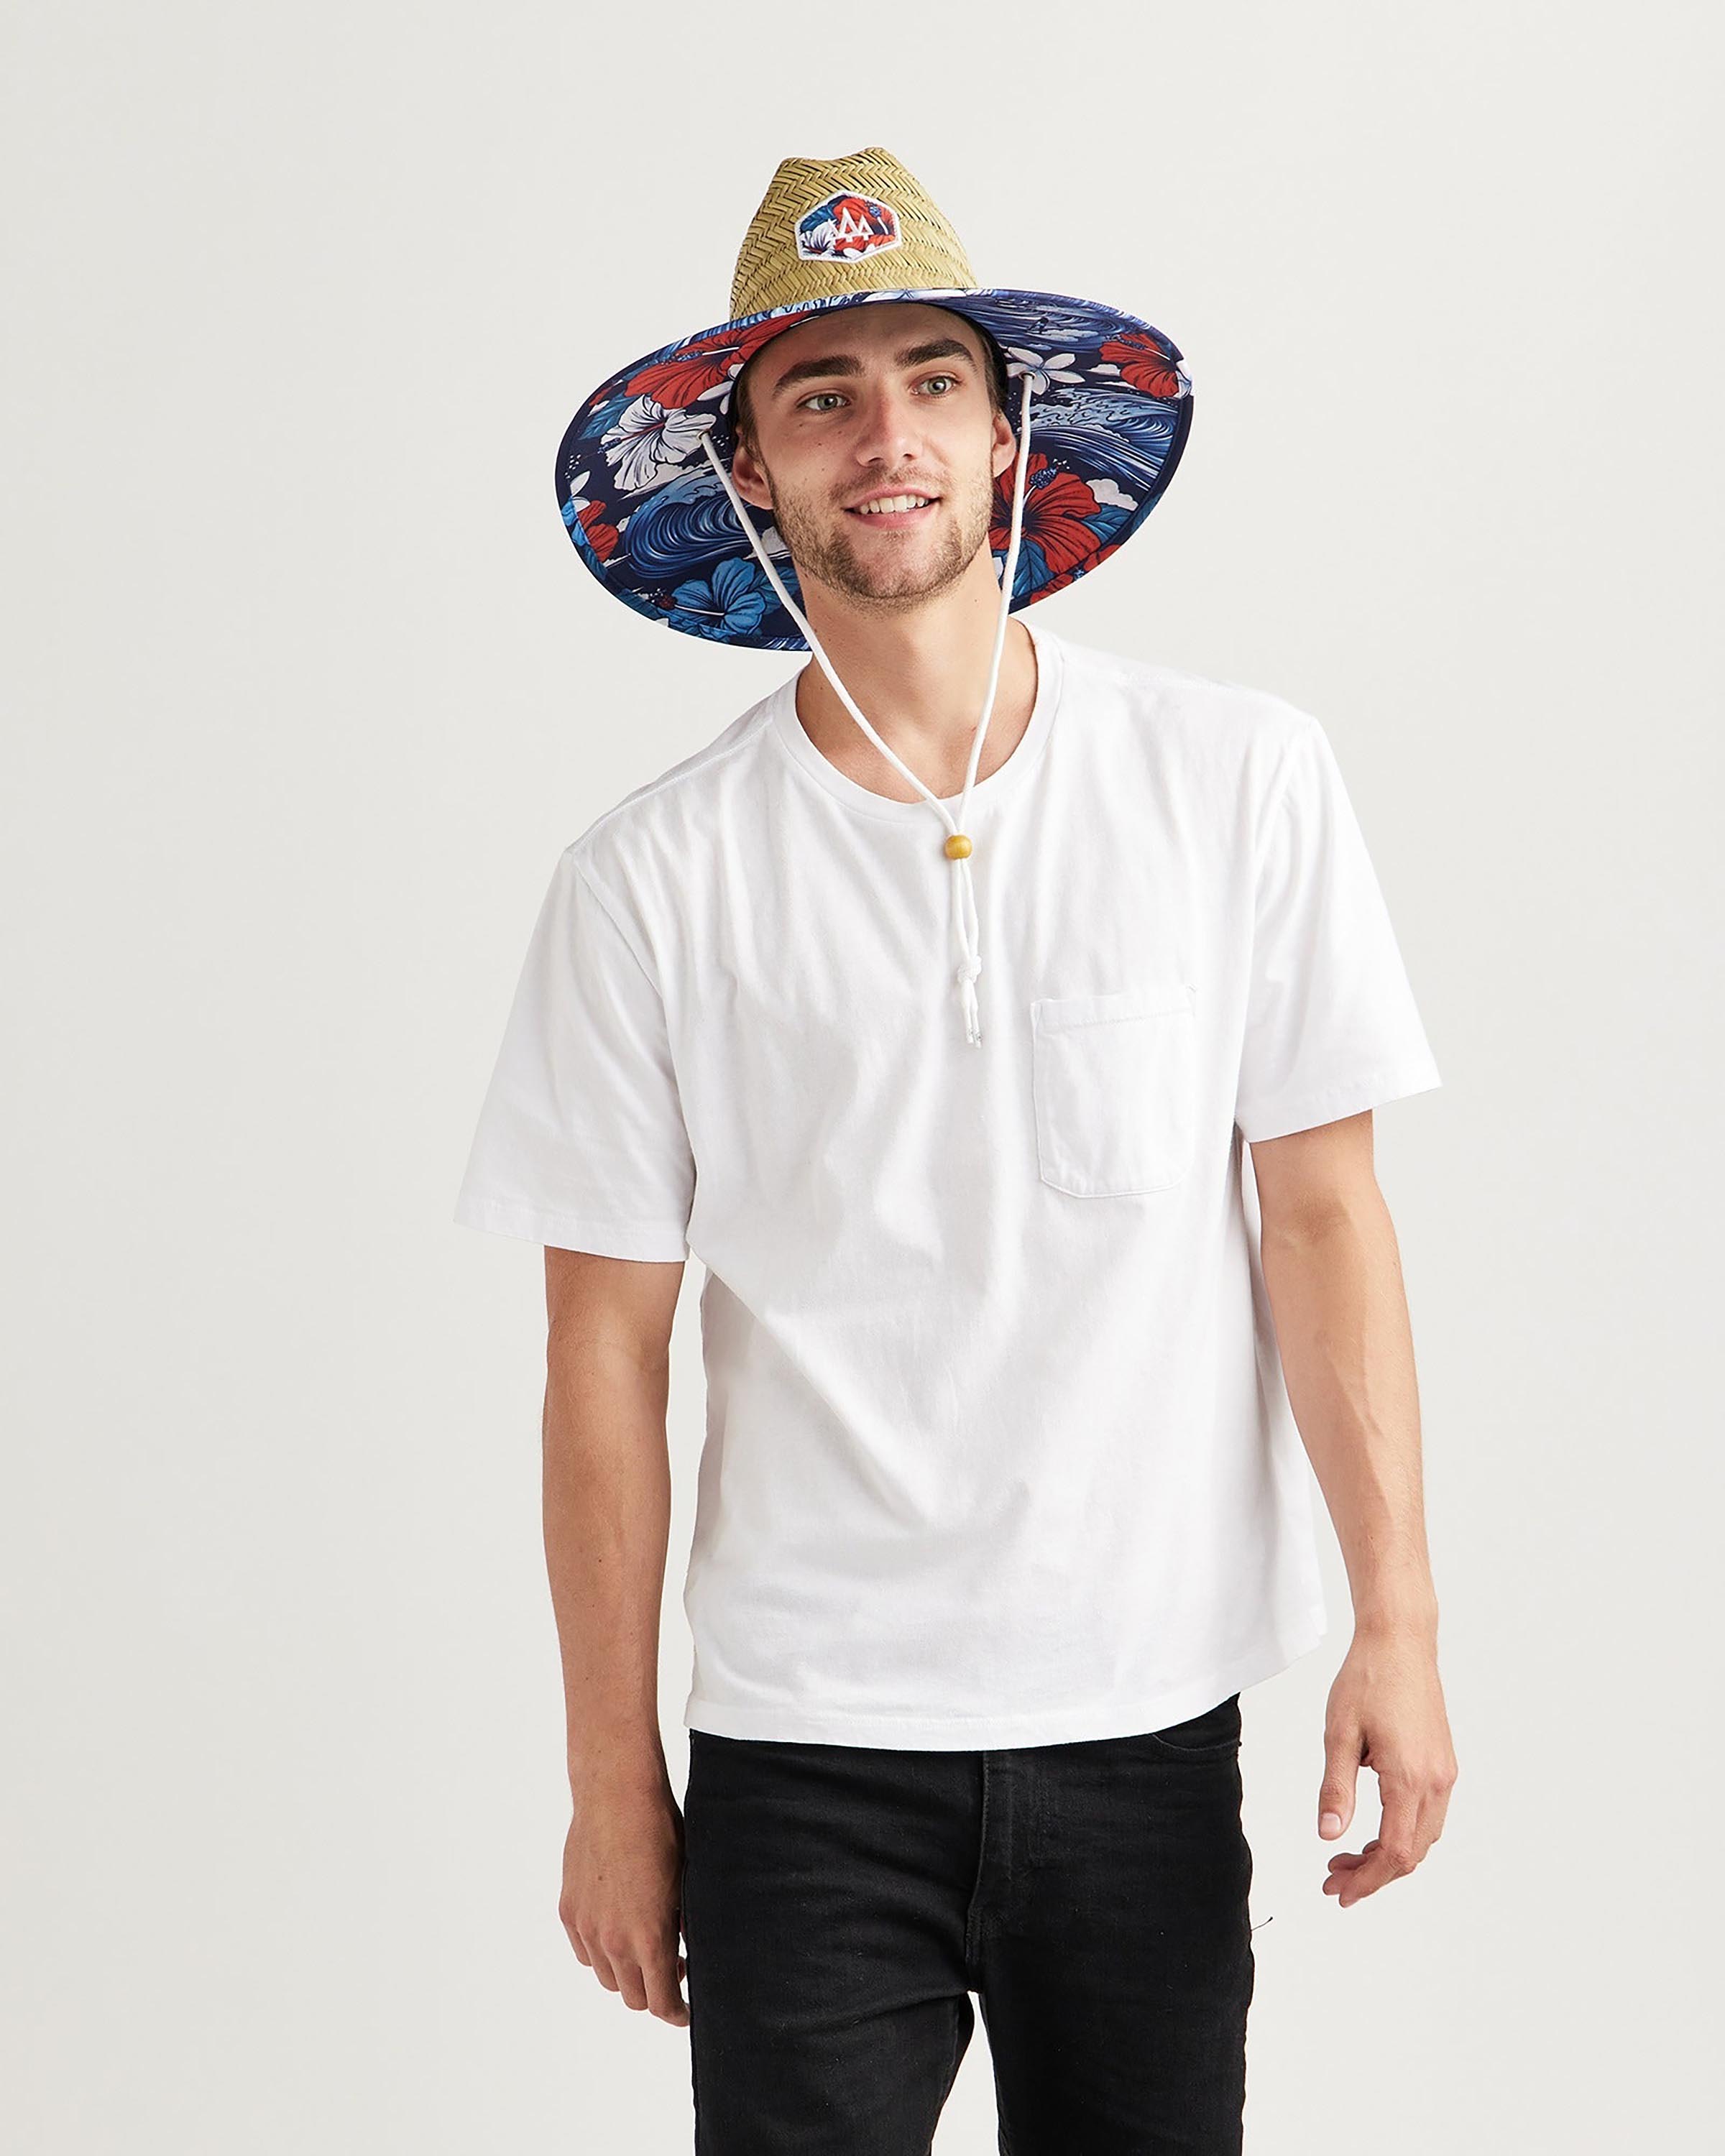 Hemlock male model looking to the side wearing Midway straw lifeguard hat with USA floral pattern